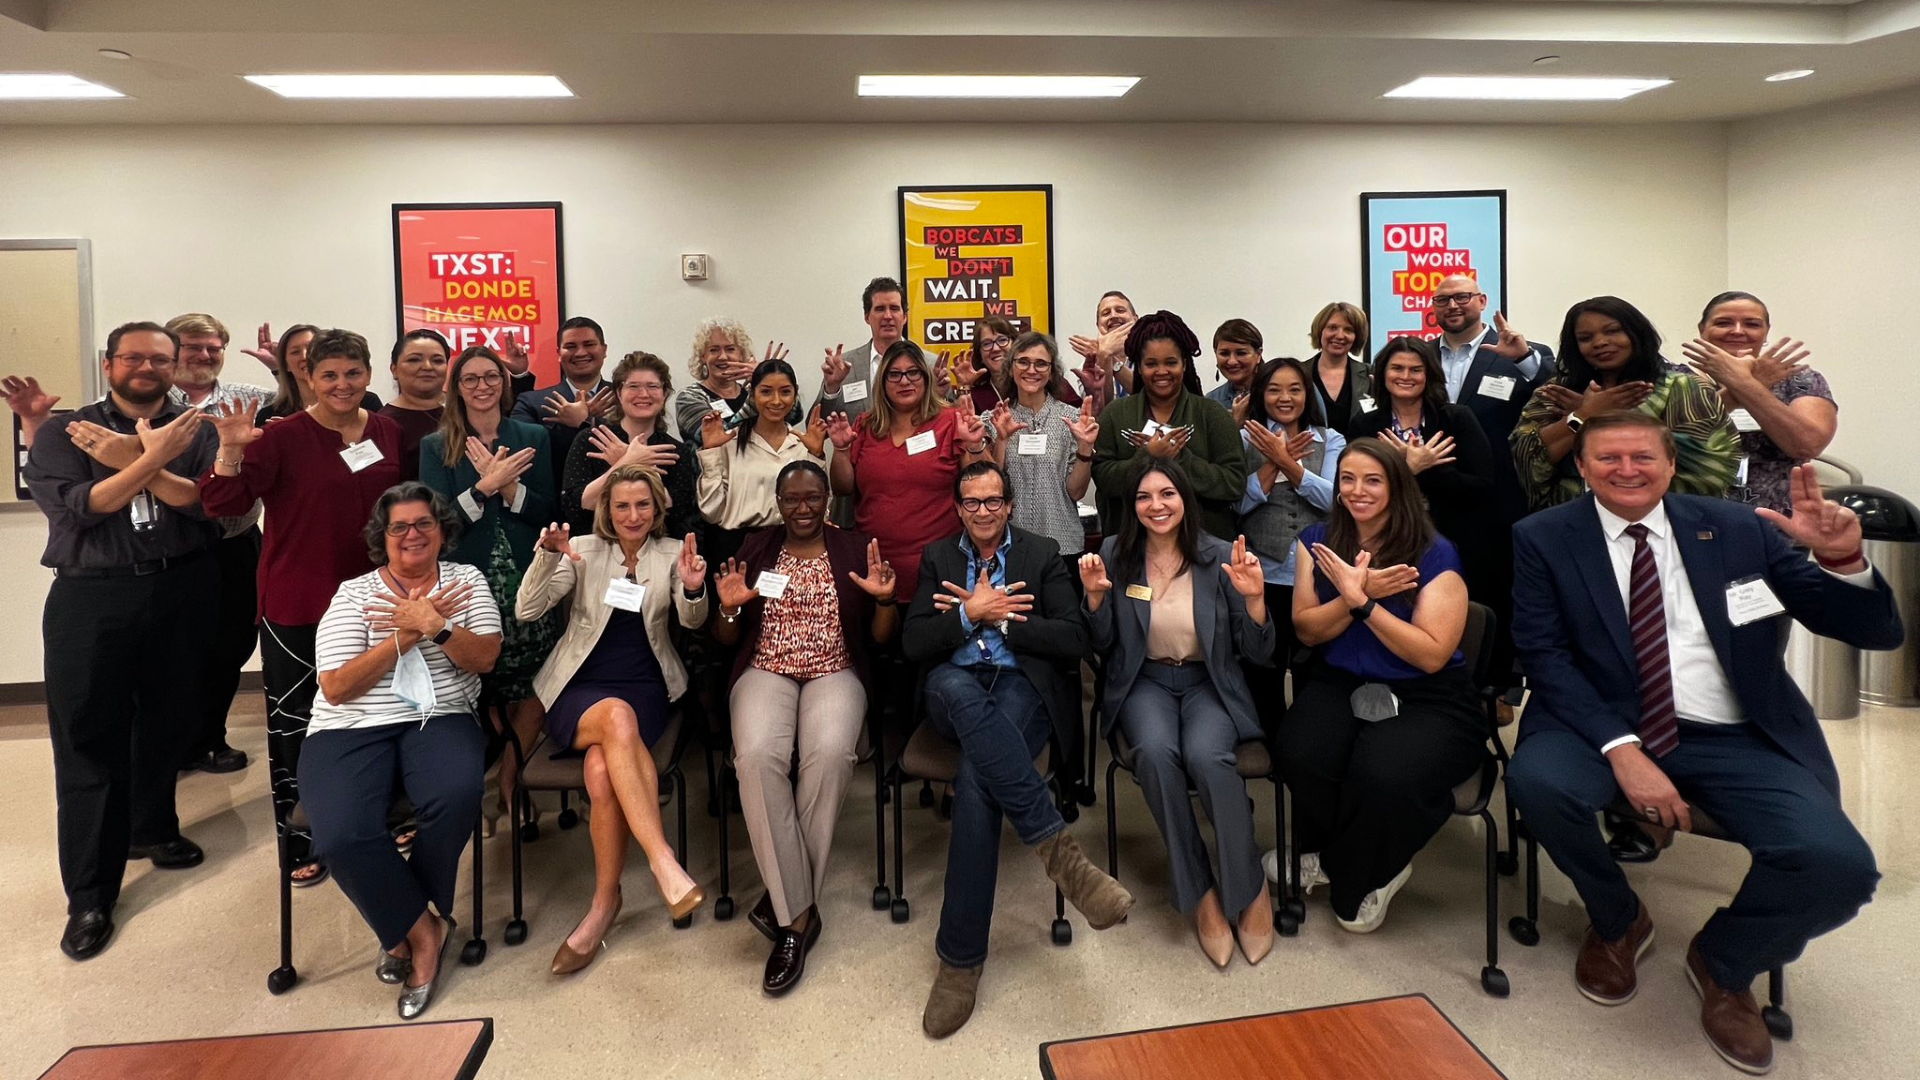 ACC and TXST professionals display their colleges' hand signs